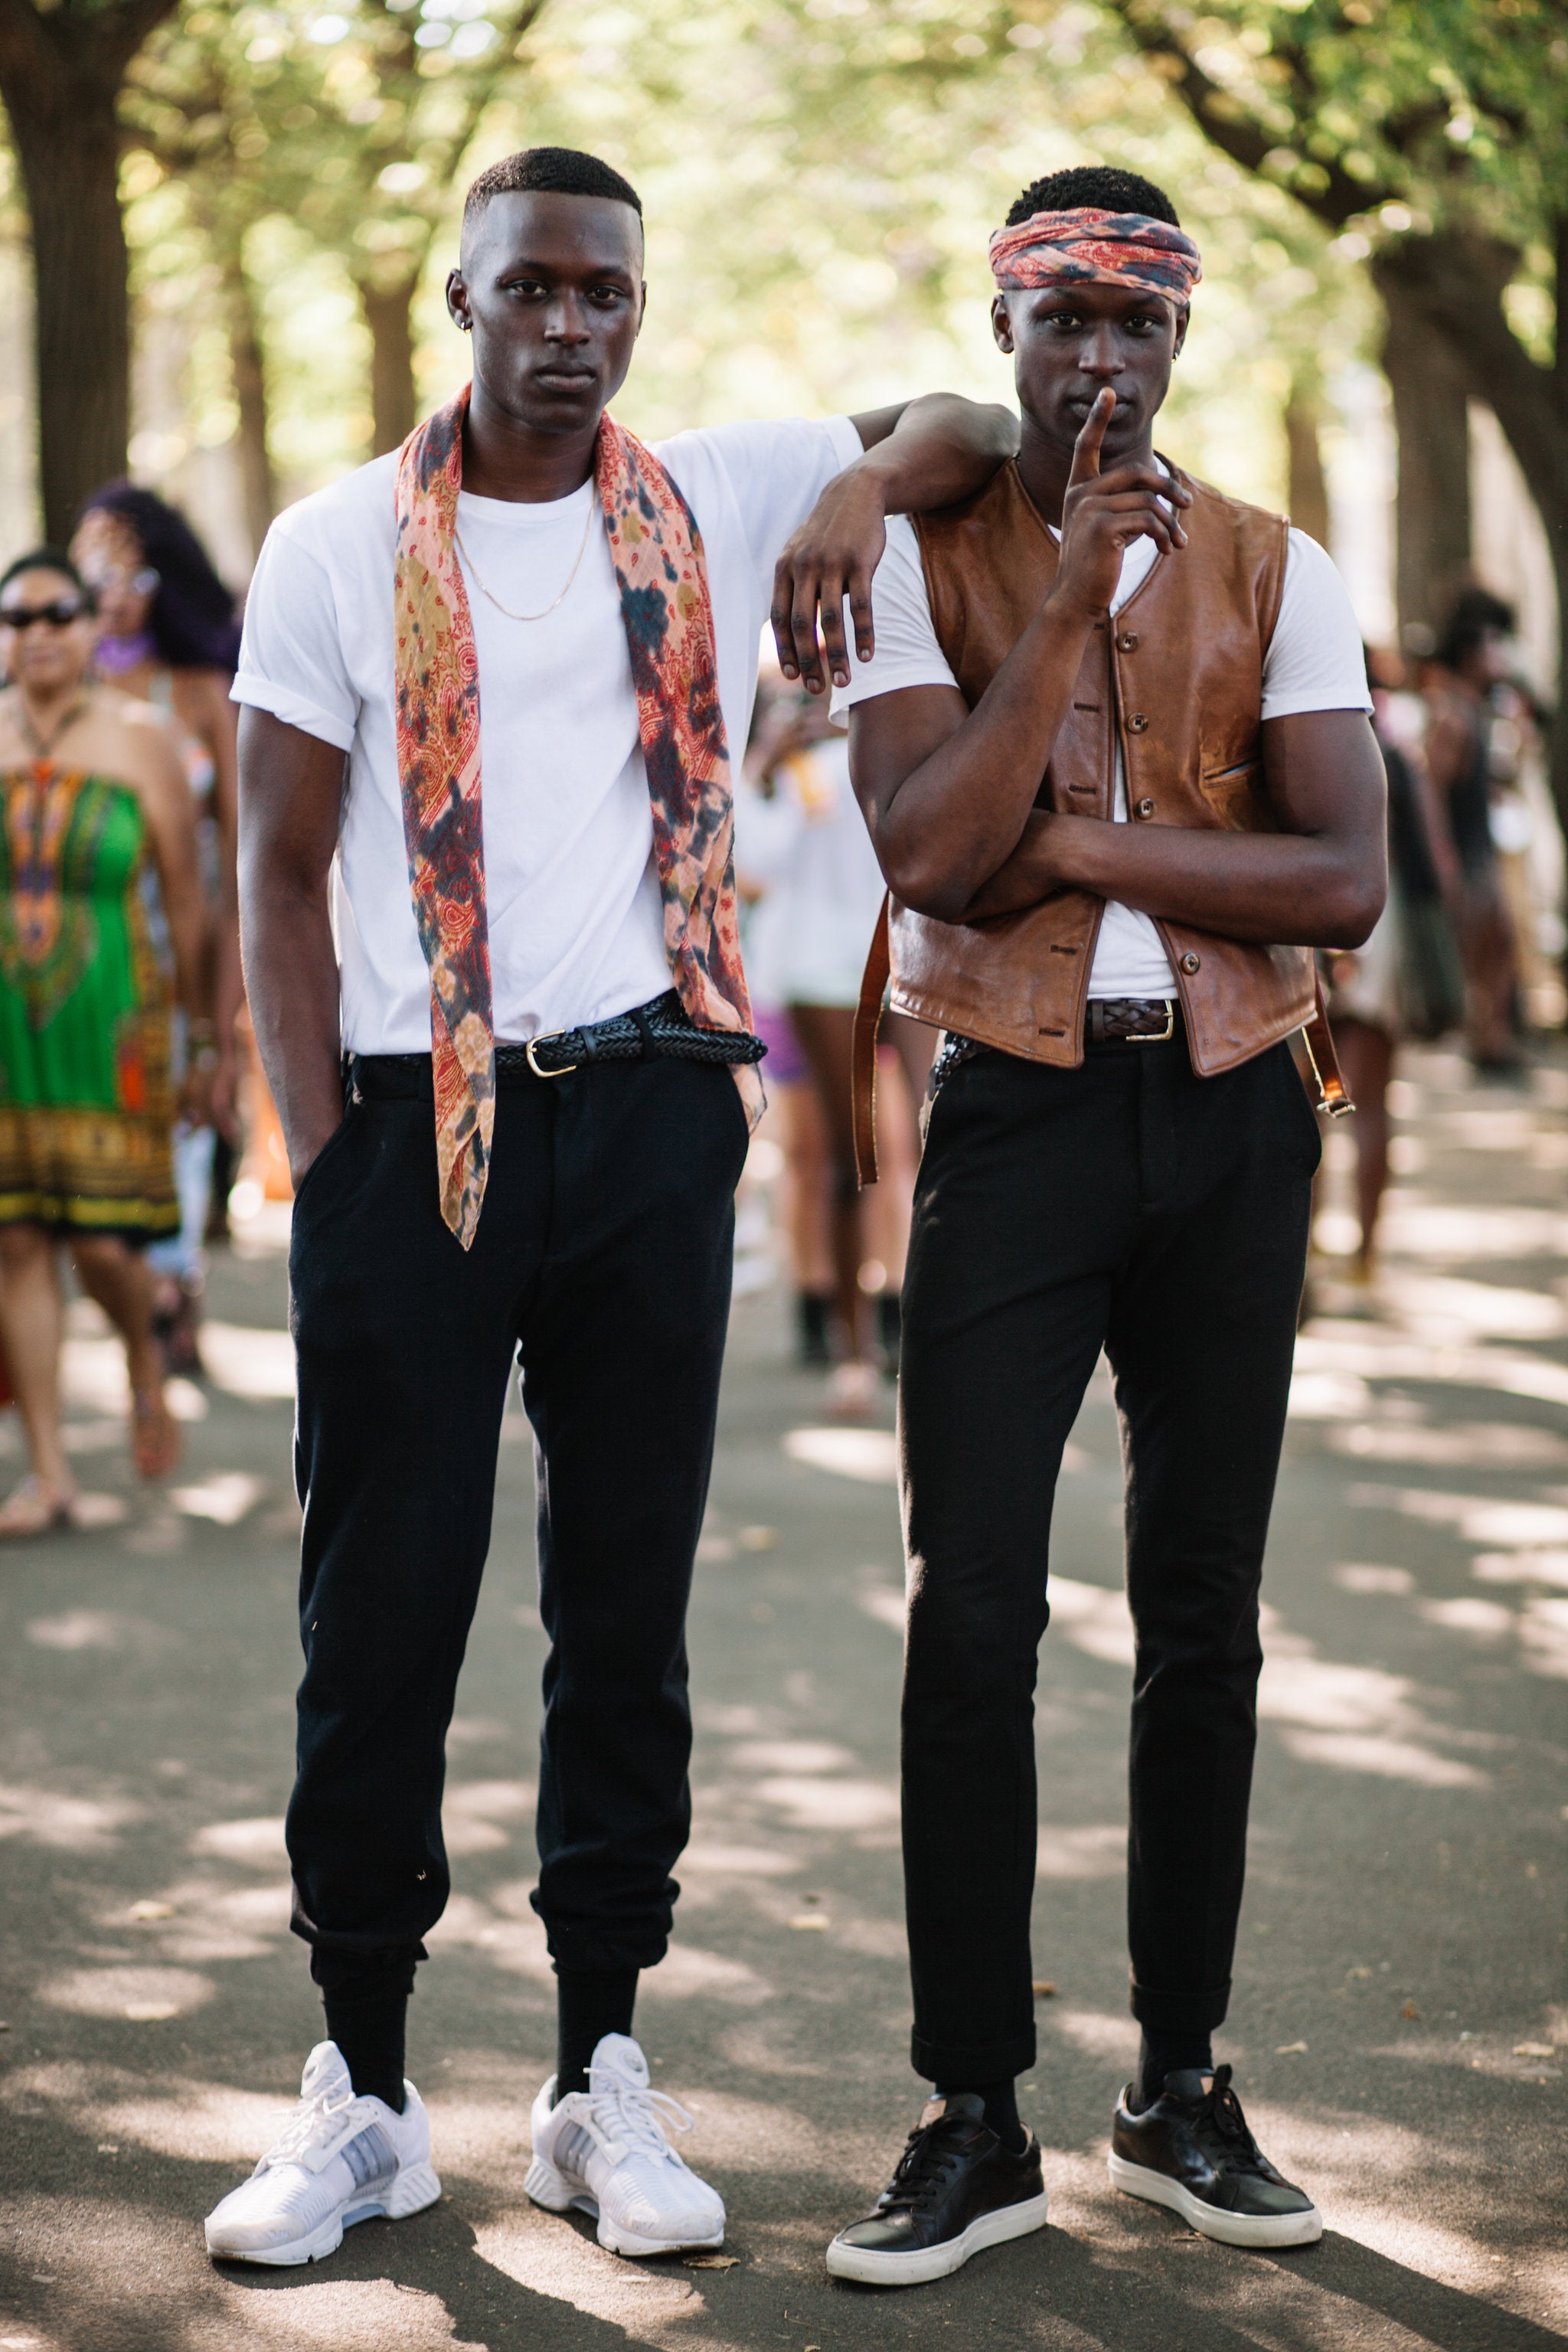 The Fellas Really Brought it at AFROPUNK!
